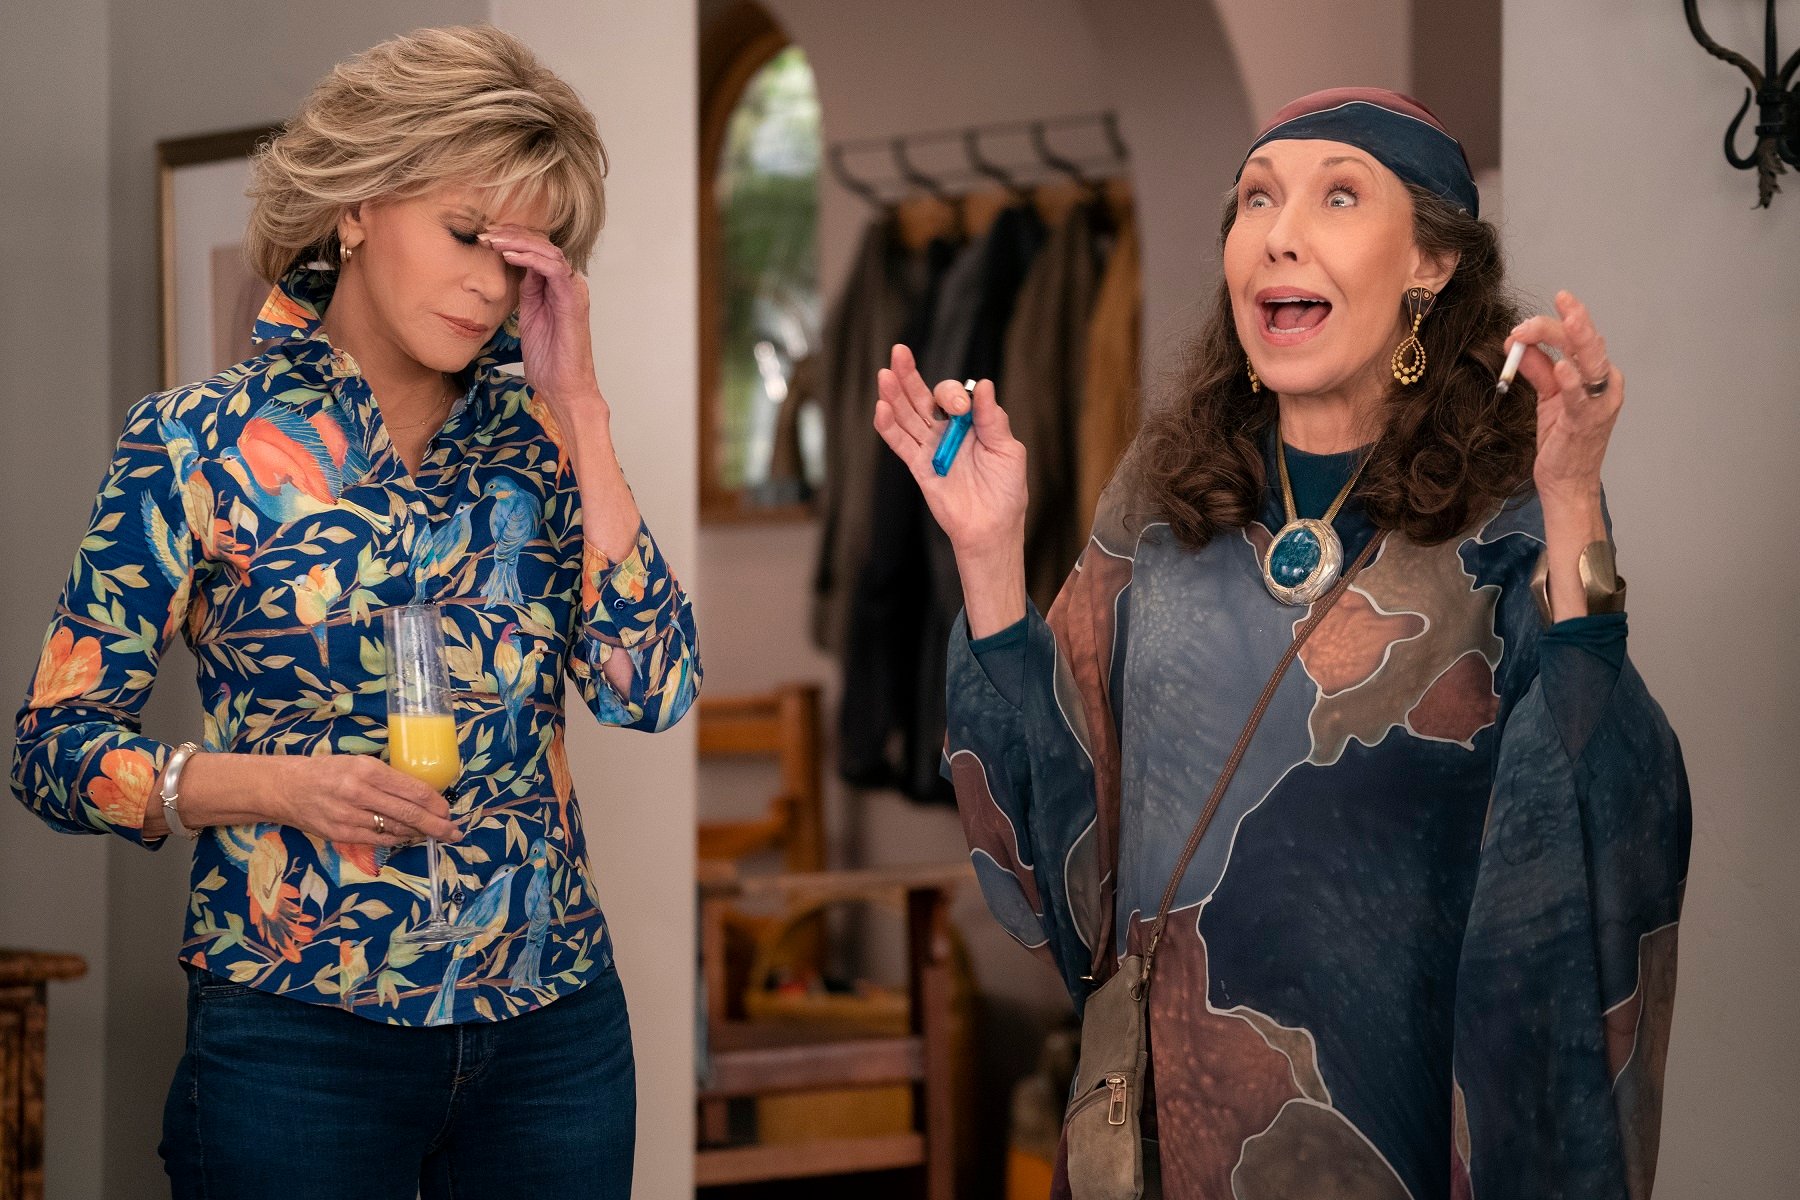 Jane Fonda as Grace and Lily Tomlin as Frankie in season 6 in 'Grace and Frankie'